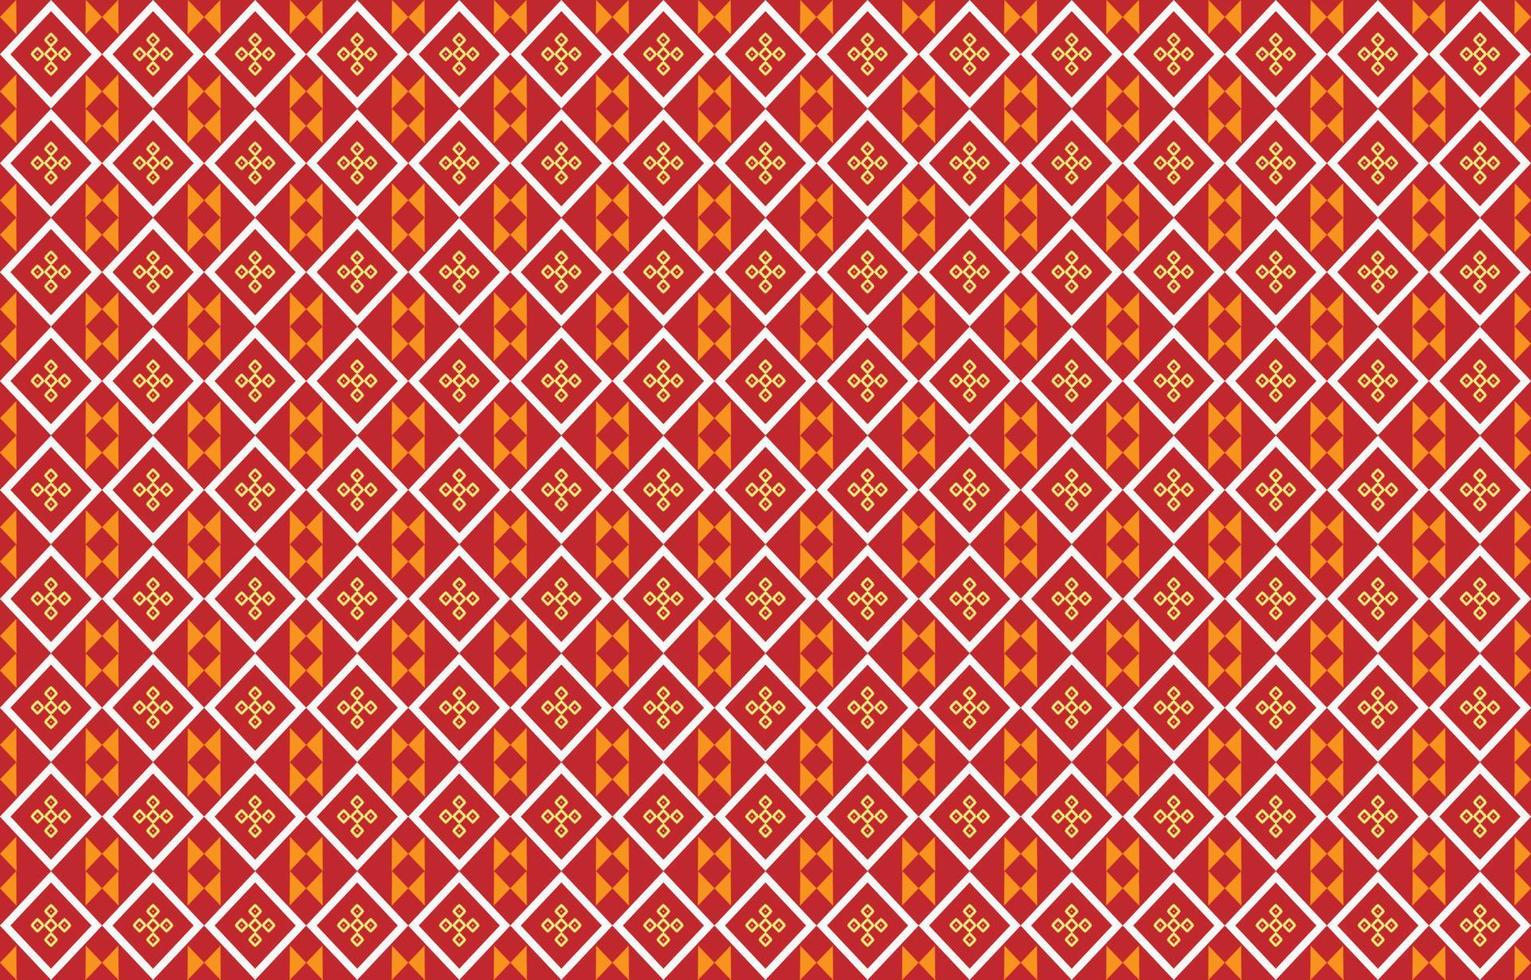 Abstract geometric pattern, Geometric ethnic oriental pattern traditional, design for wallpaper,fabric,curtain,carpet,clothing,Batik,wrapping, Geometric vector illustration, Embroidery style.